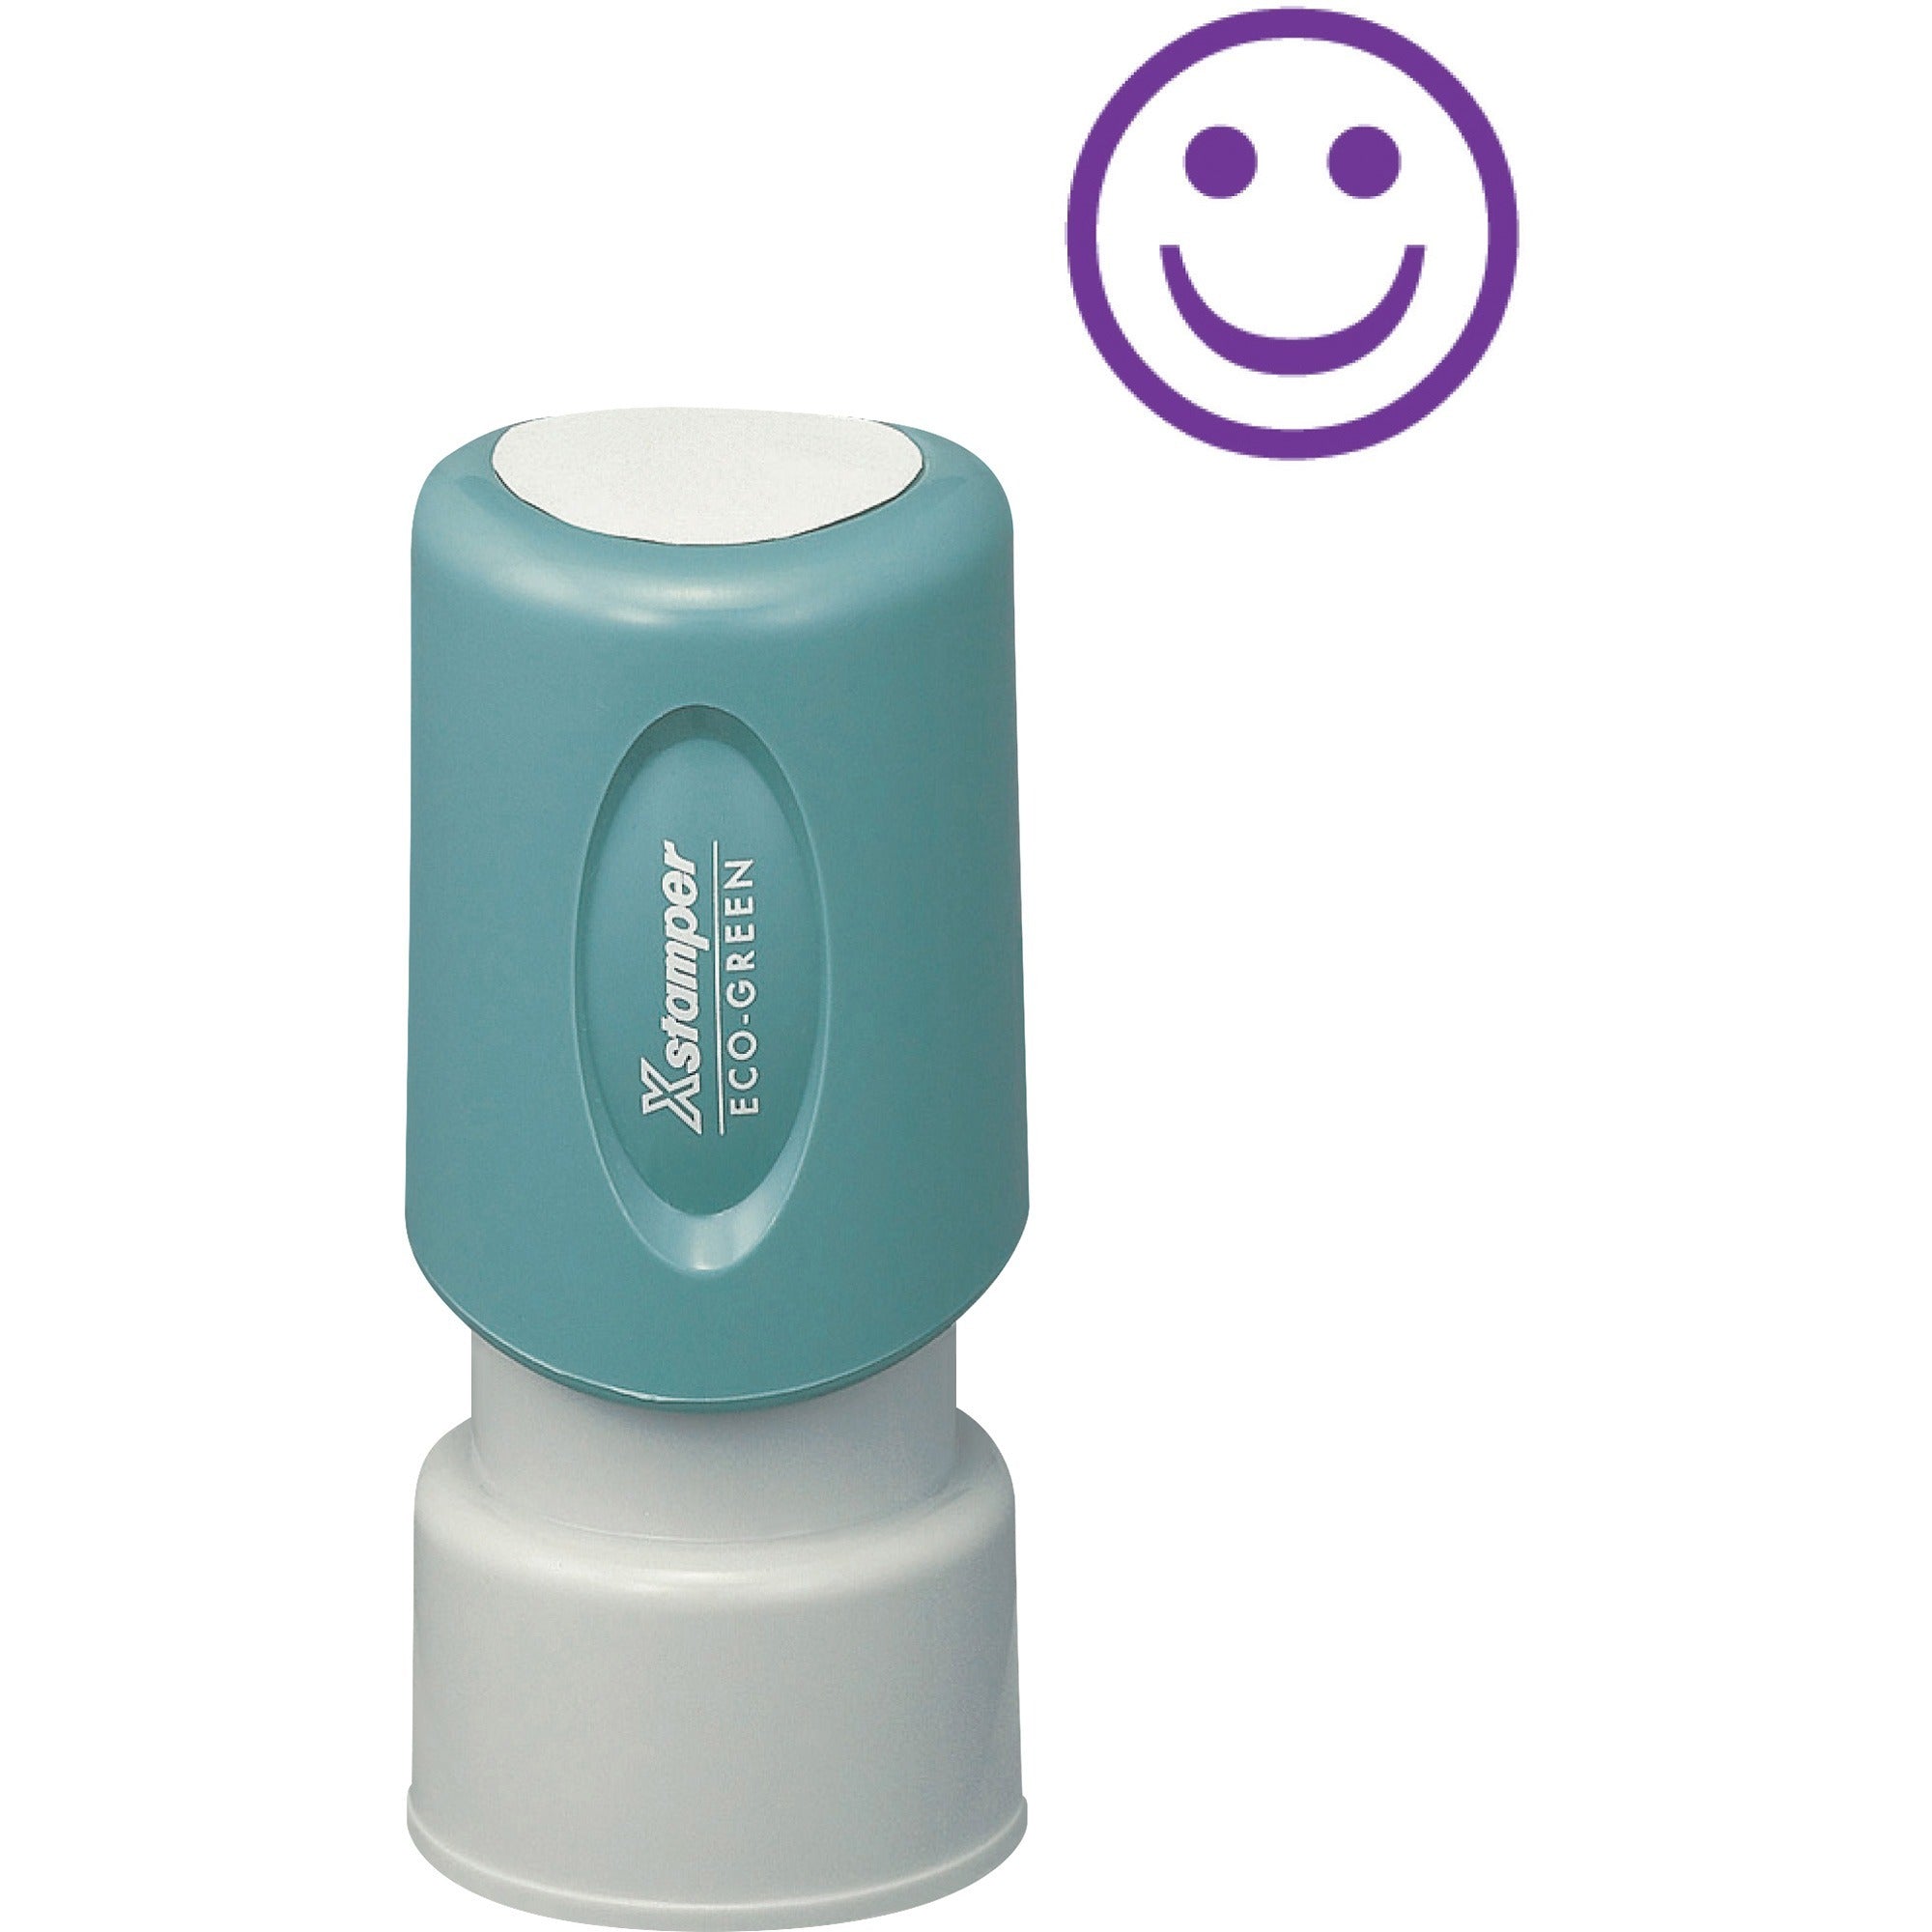 Xstamper Pre-Inked Specialty Smiley Face Stamp - Message/Design Stamp - "GOOD" - 0.63" Impression Diameter - 100000 Impression(s) - Blue - Recycled - 1 Each - 